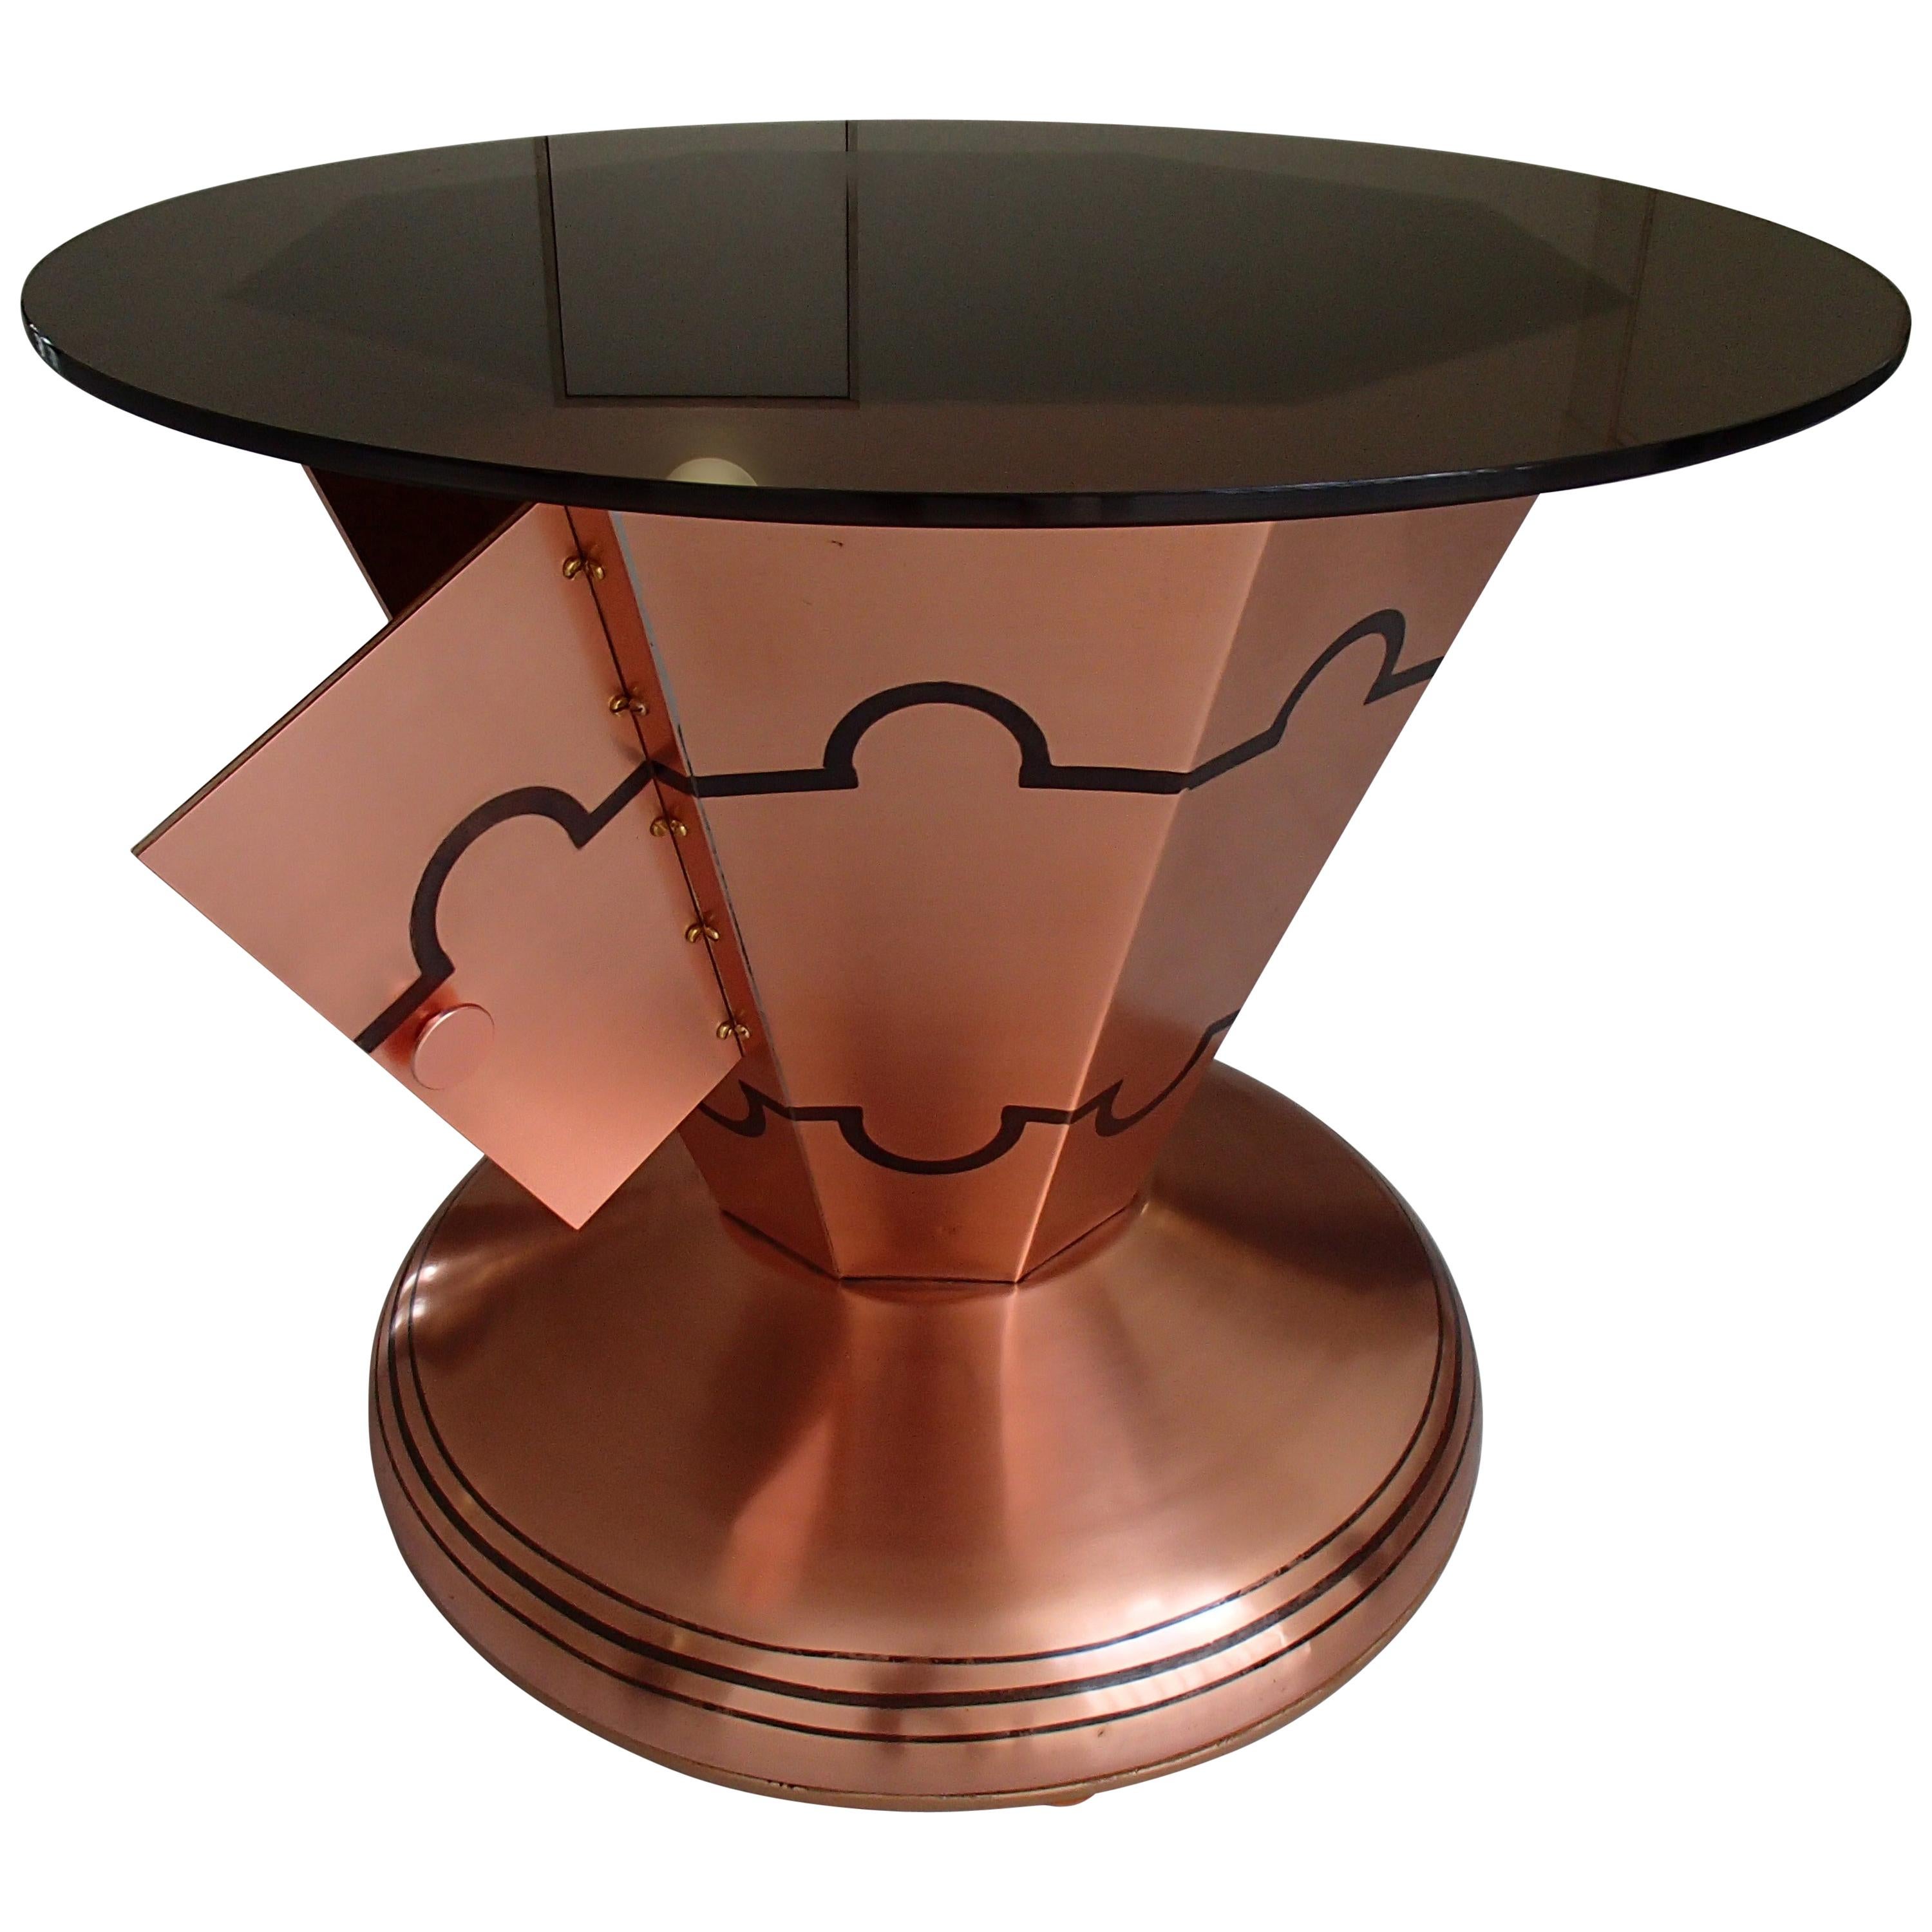 Art Deco Copper Bar Table on Wheels with Turnable Tray Inside and Glass Top